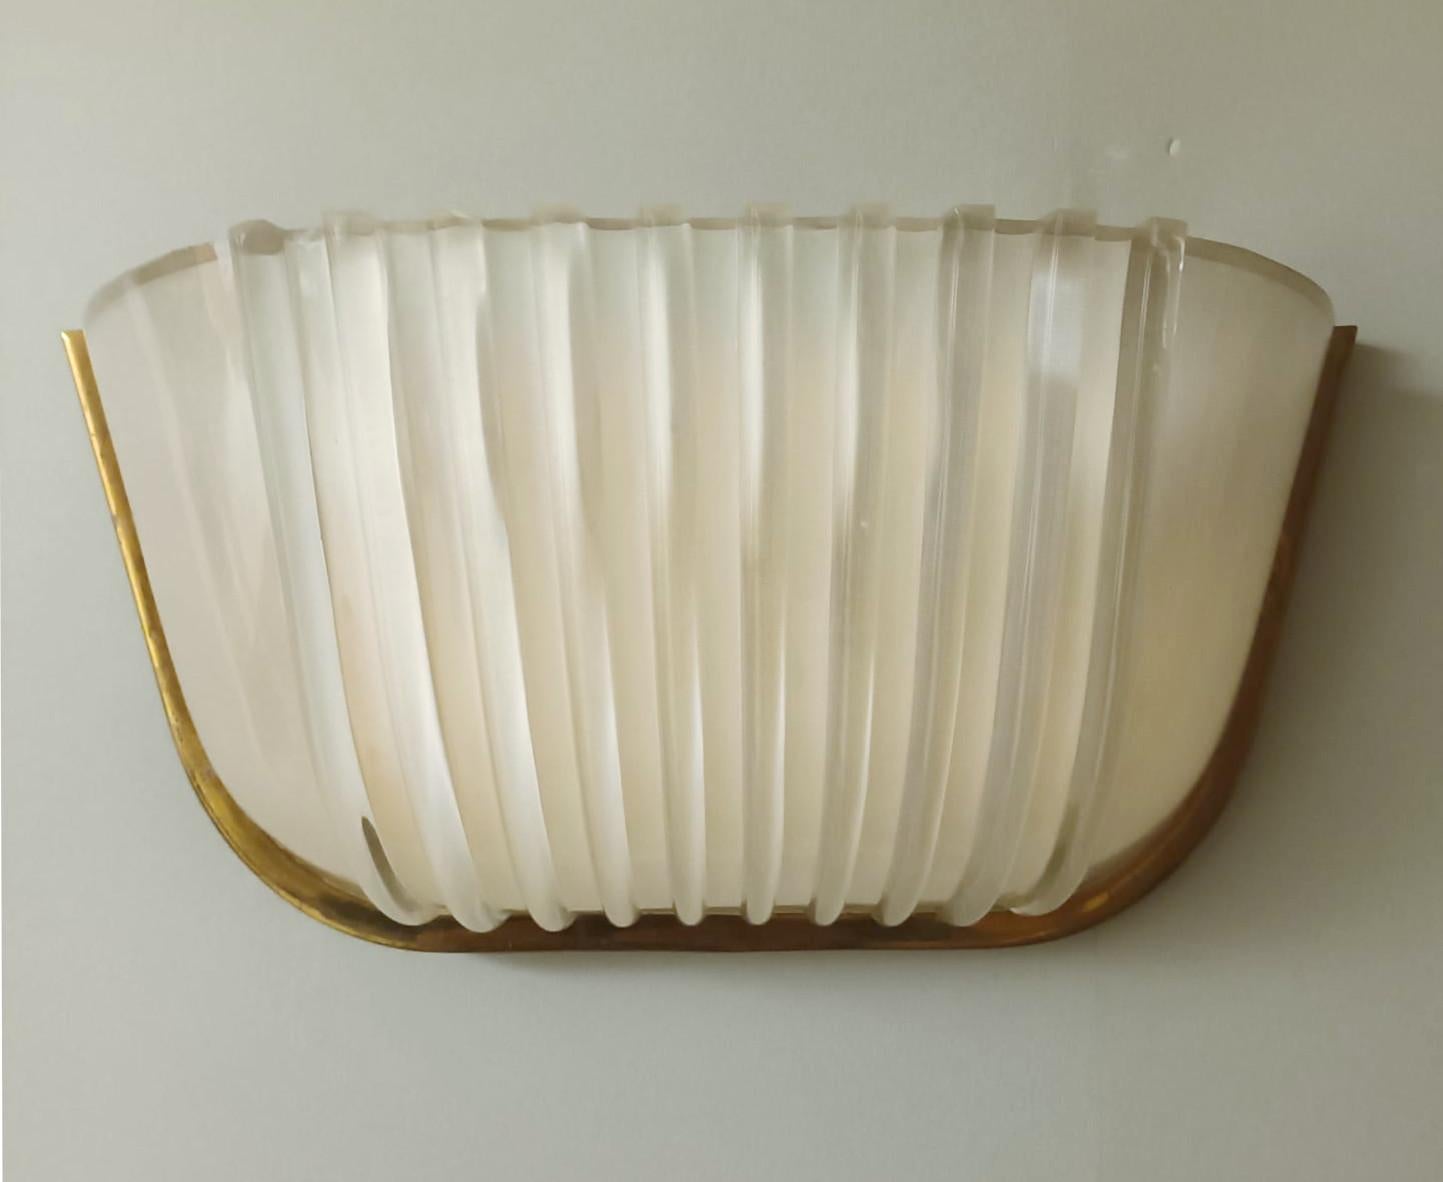 Vintage French wall light with Art Deco ribbed frosted glass / made in France circa 1930s
2 lights / E12 or E14 type / max 40W each
Measures: Height 6 inches / Width 13 inches / Depth 5 inches
1 available in stock in Italy
Order reference #: